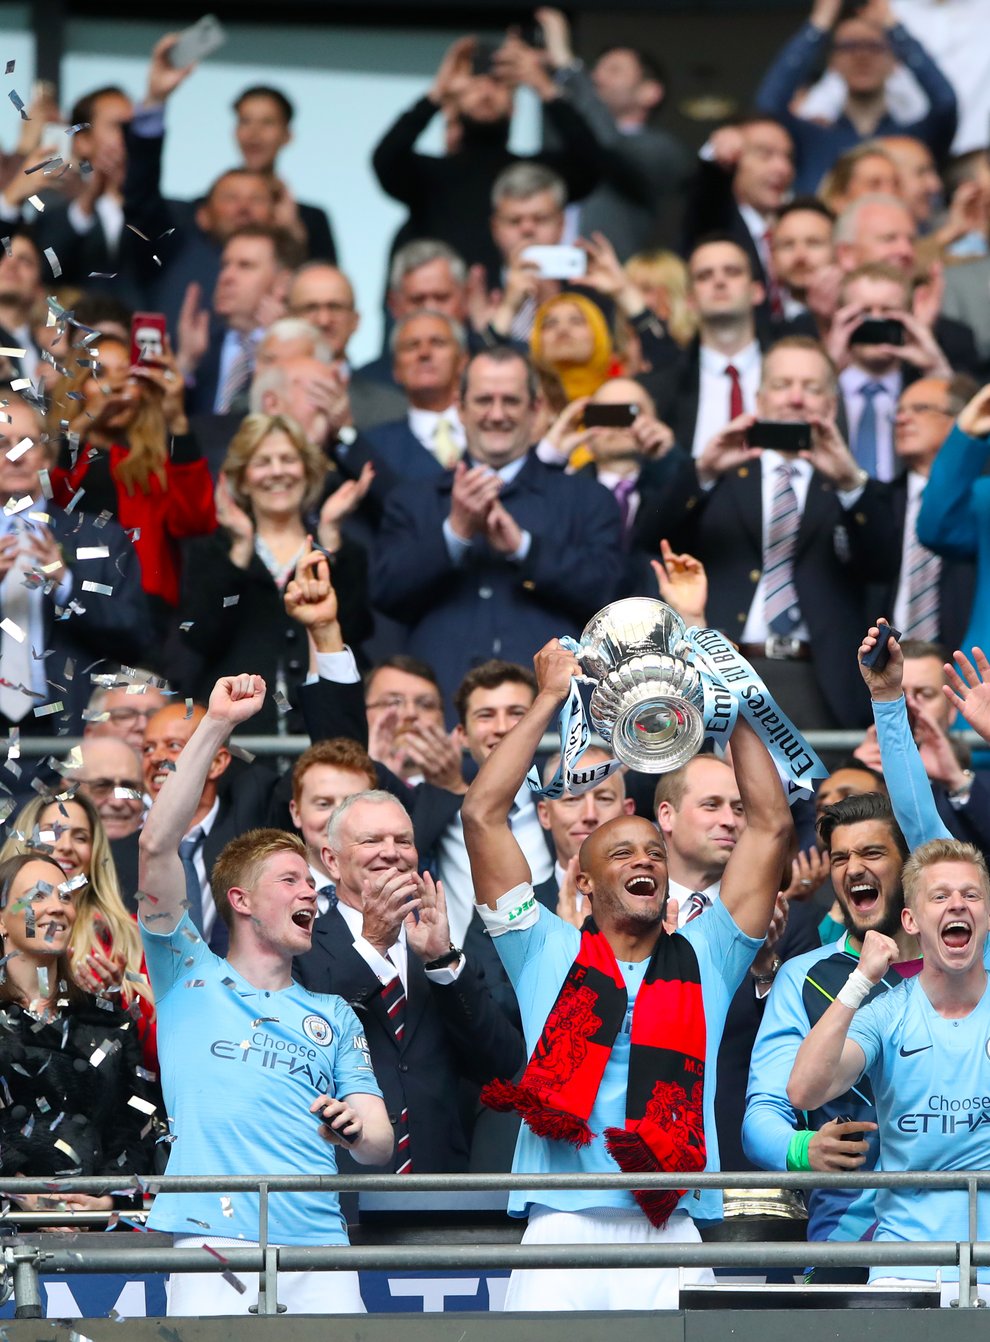 Manchester City will be looking to retain the trophy they lifted last season